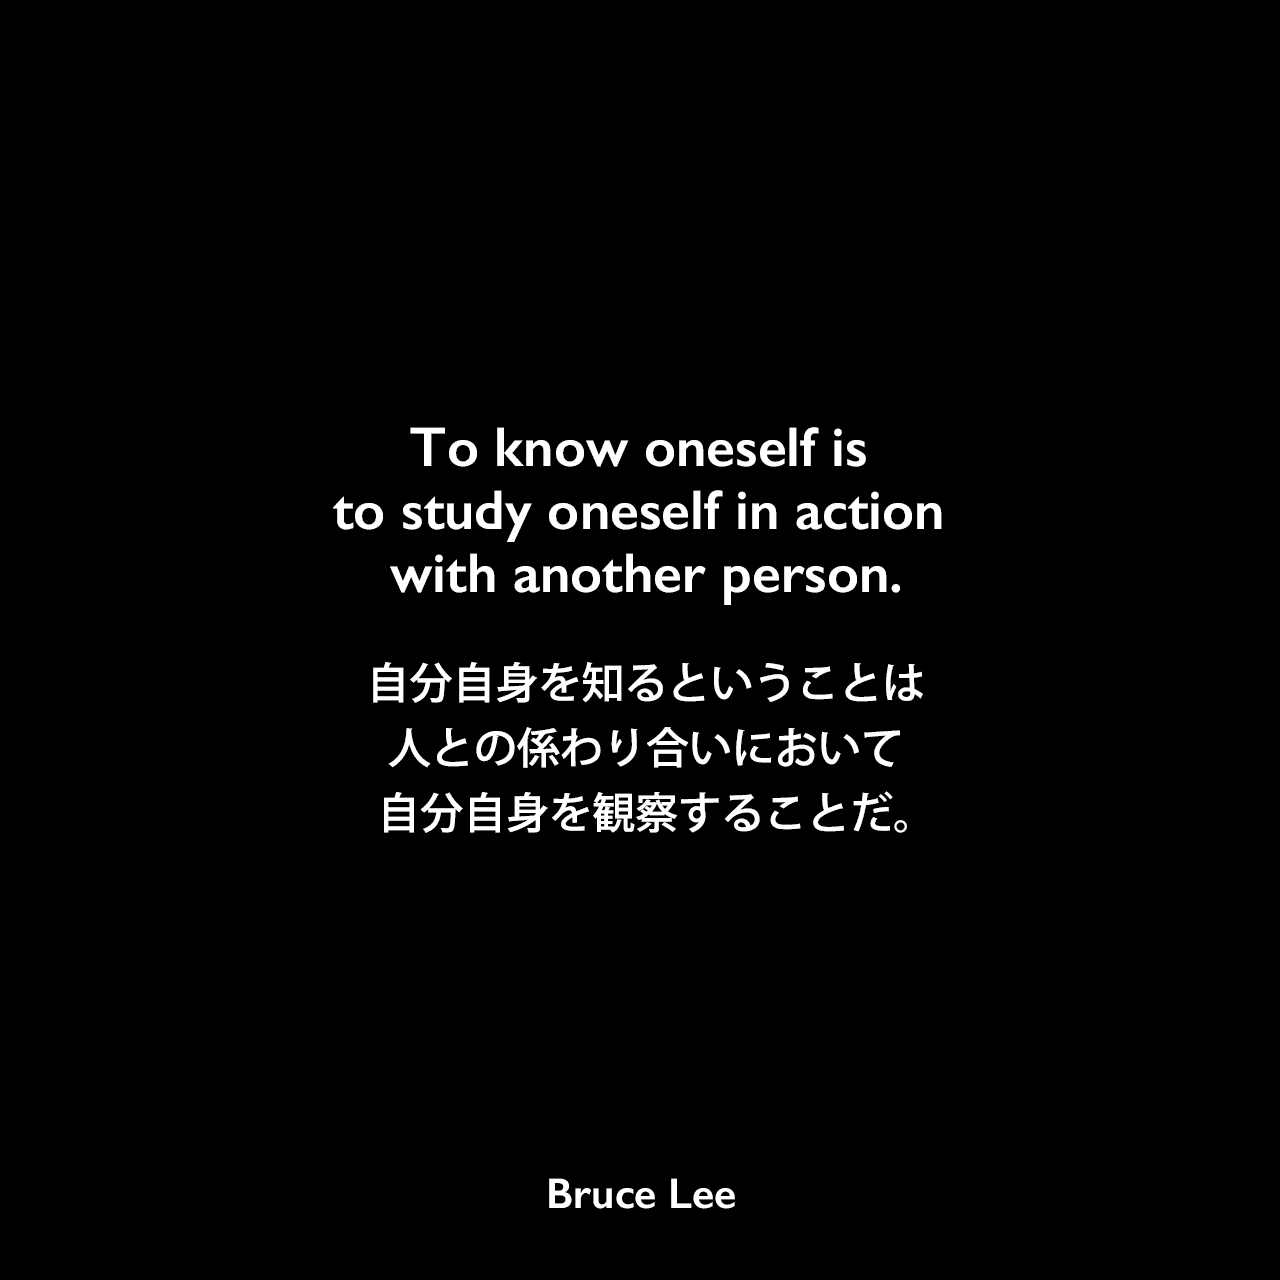 To know oneself is to study oneself in action with another person.自分自身を知るということは、人との係わり合いにおいて自分自身を観察することだ。- ブルース・リーの本「秘伝截拳道への道」よりBruce Lee